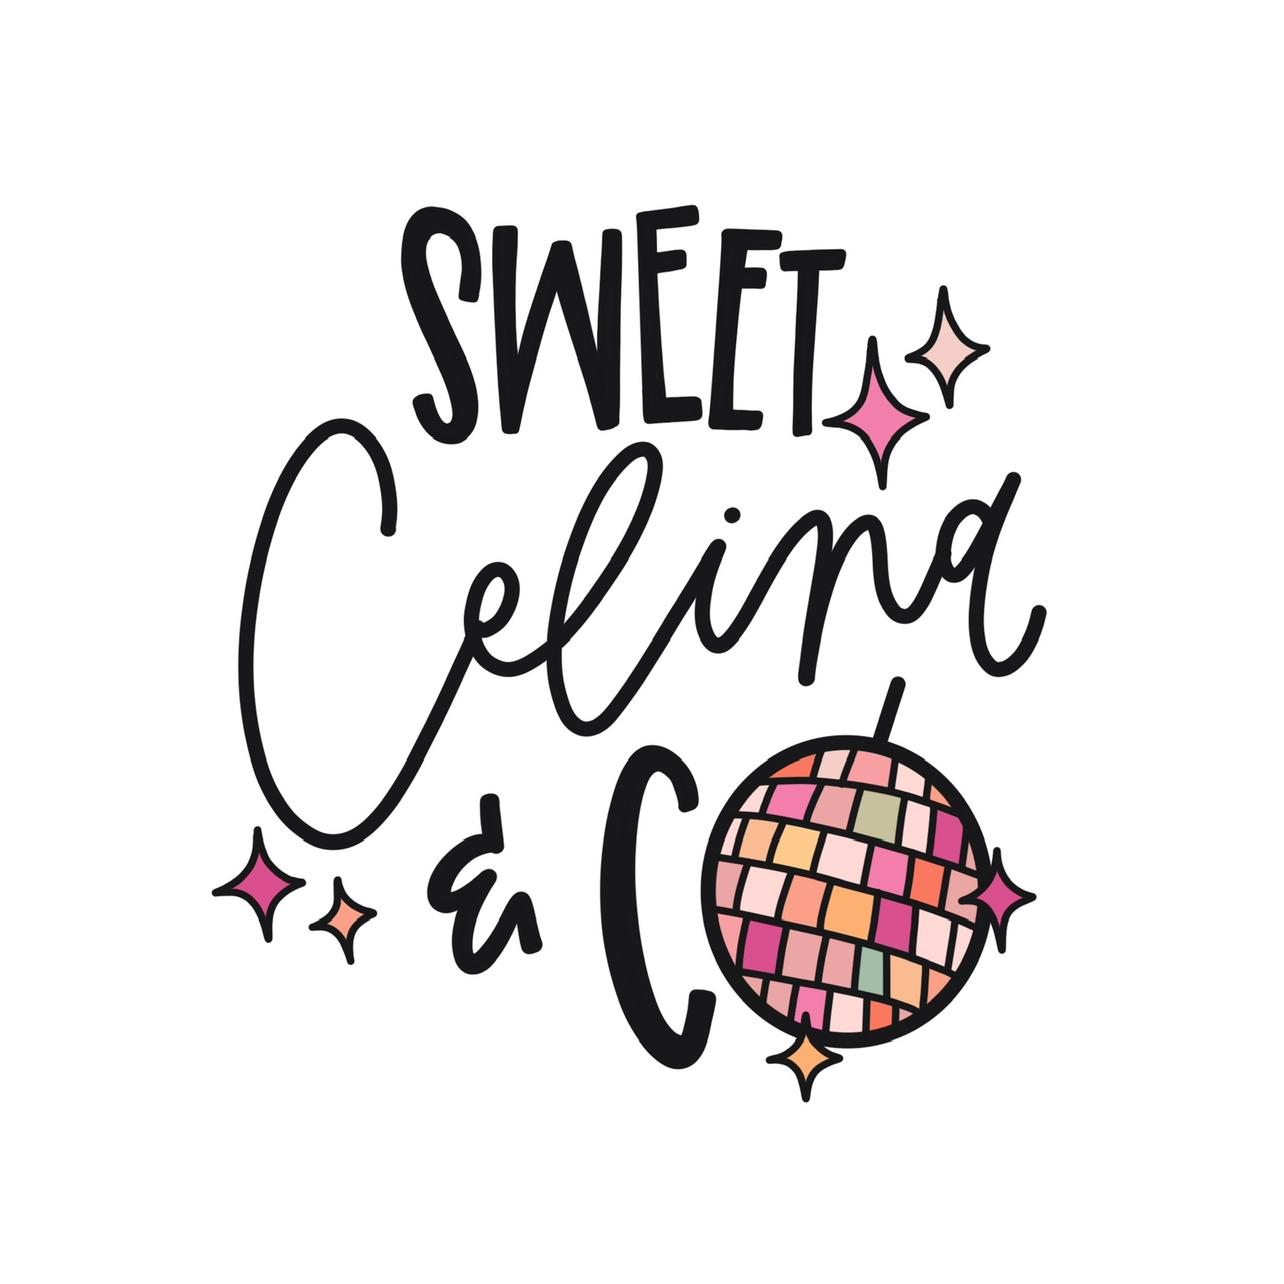 SweetCelina&Co.'s images